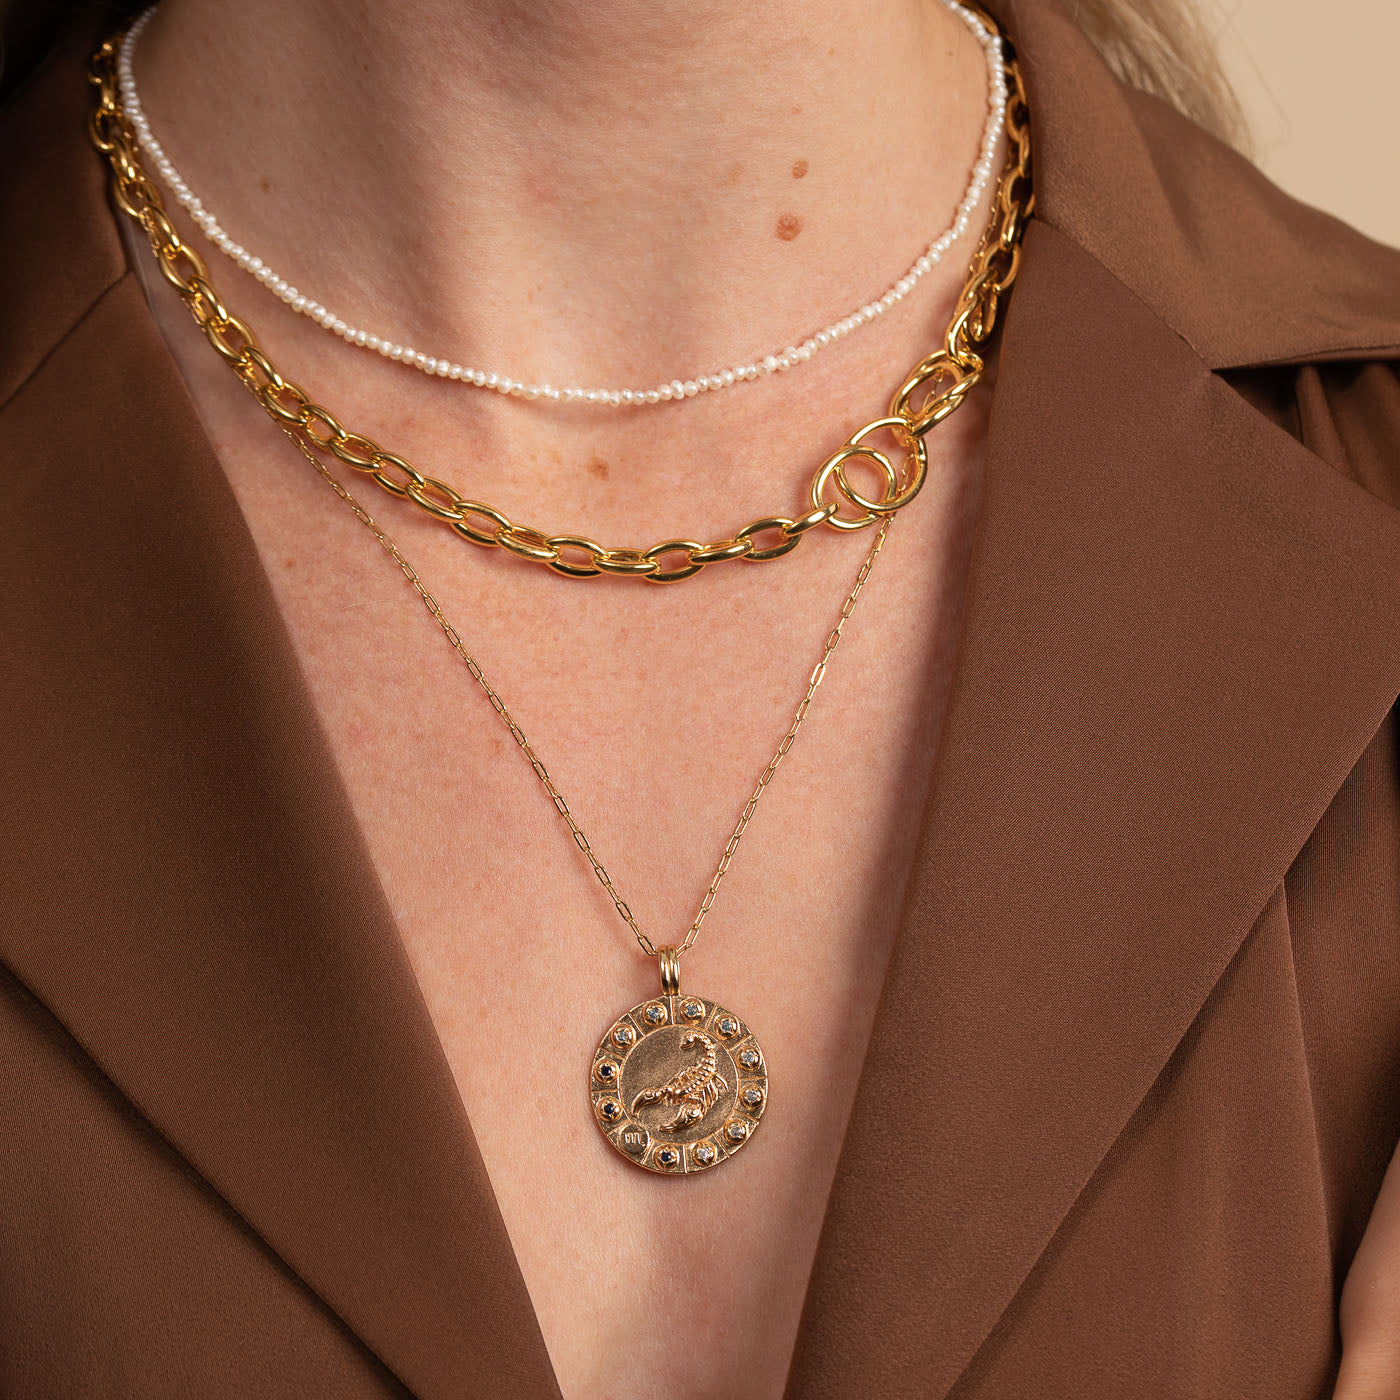 Orbit Chain Necklace in Gold worn with Zodiac Pendant Necklace